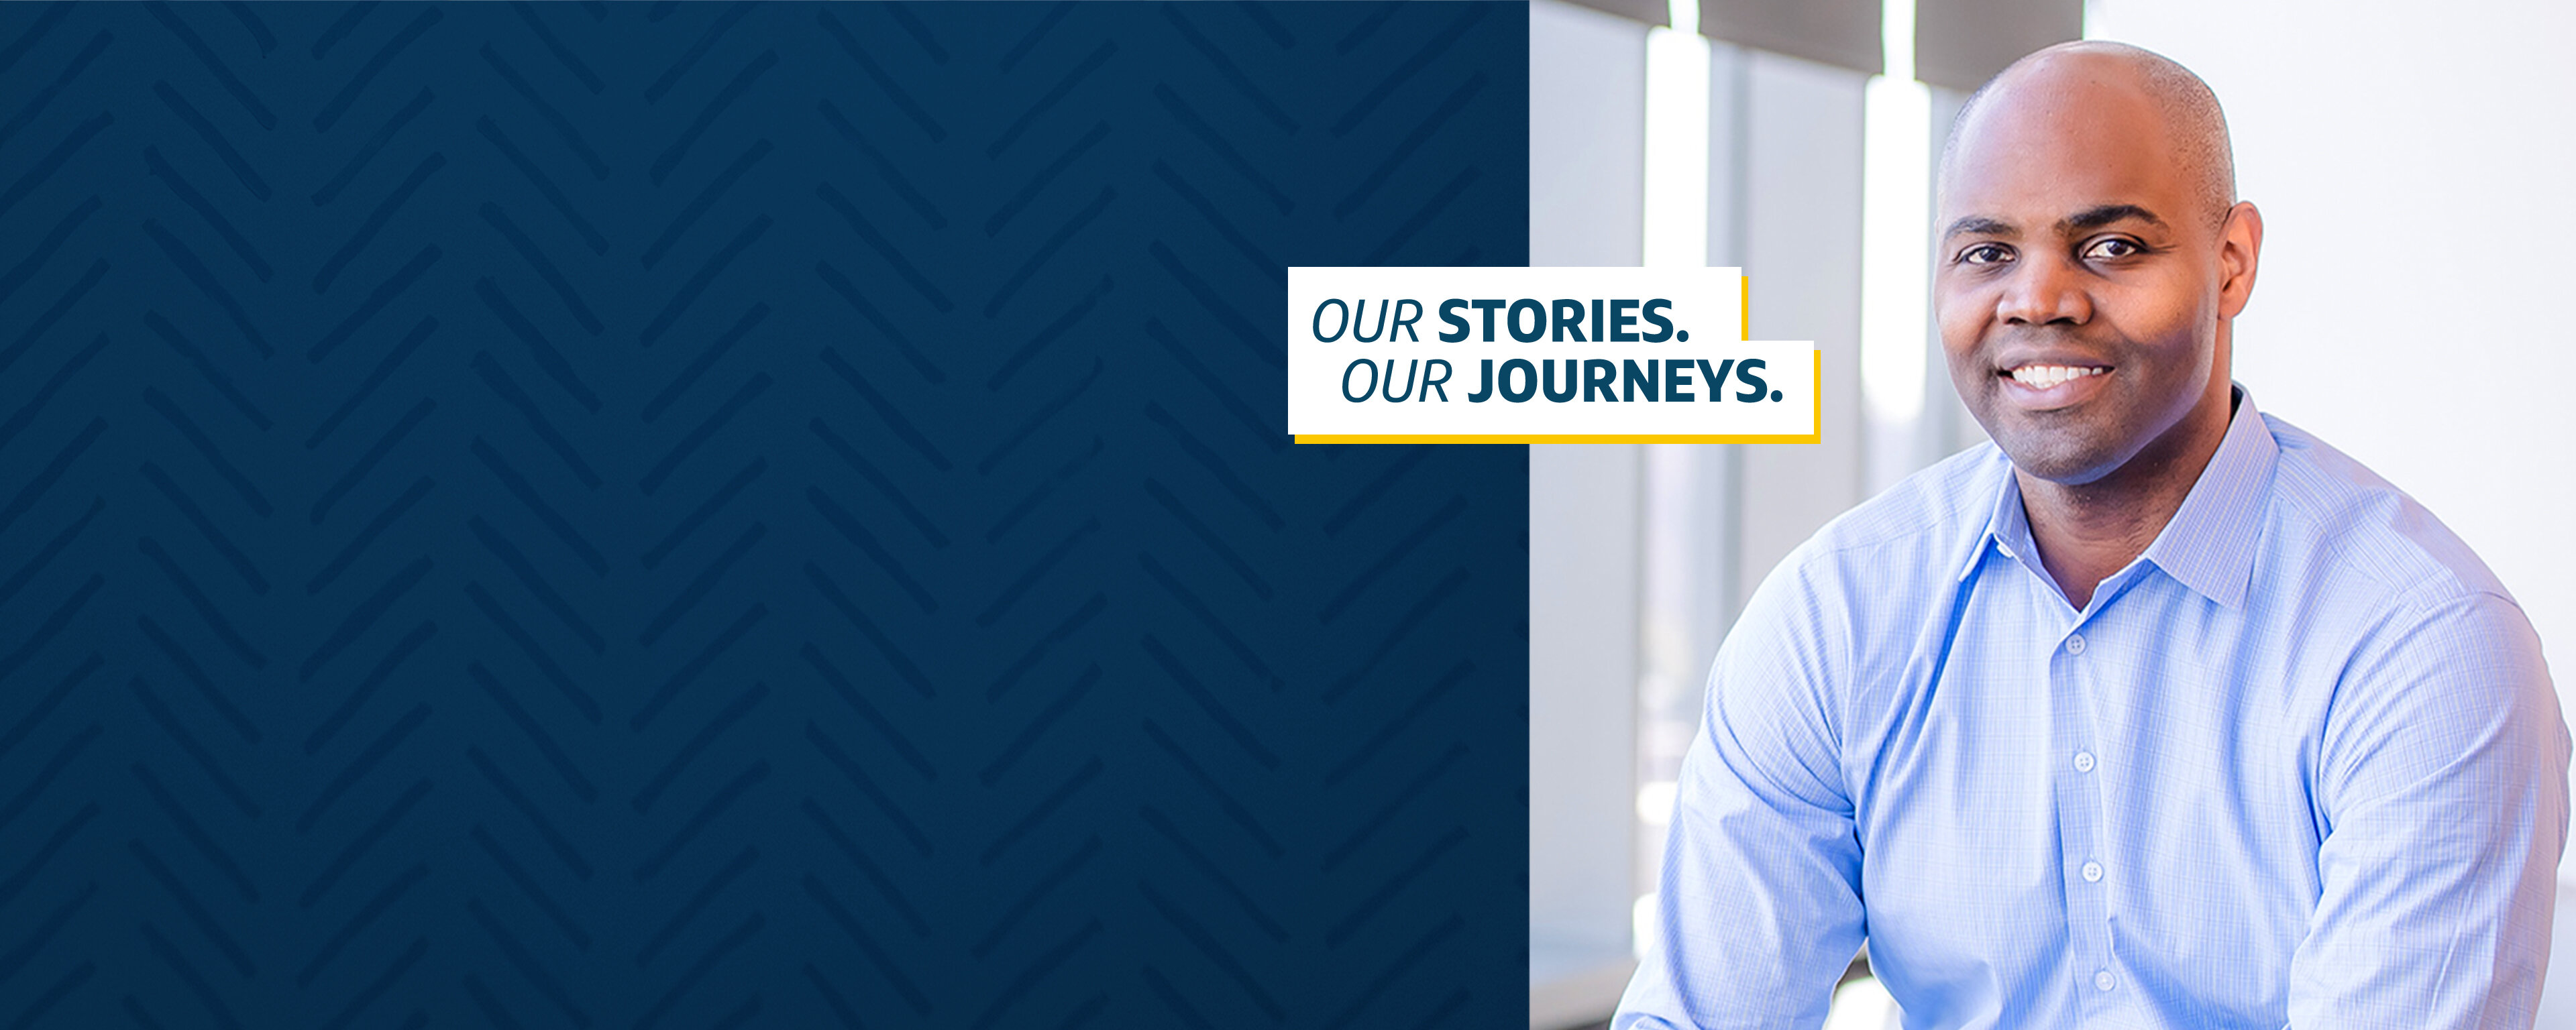 Capital One executive Corey Lee talks about his personal journey to his own inclusion in the workplace